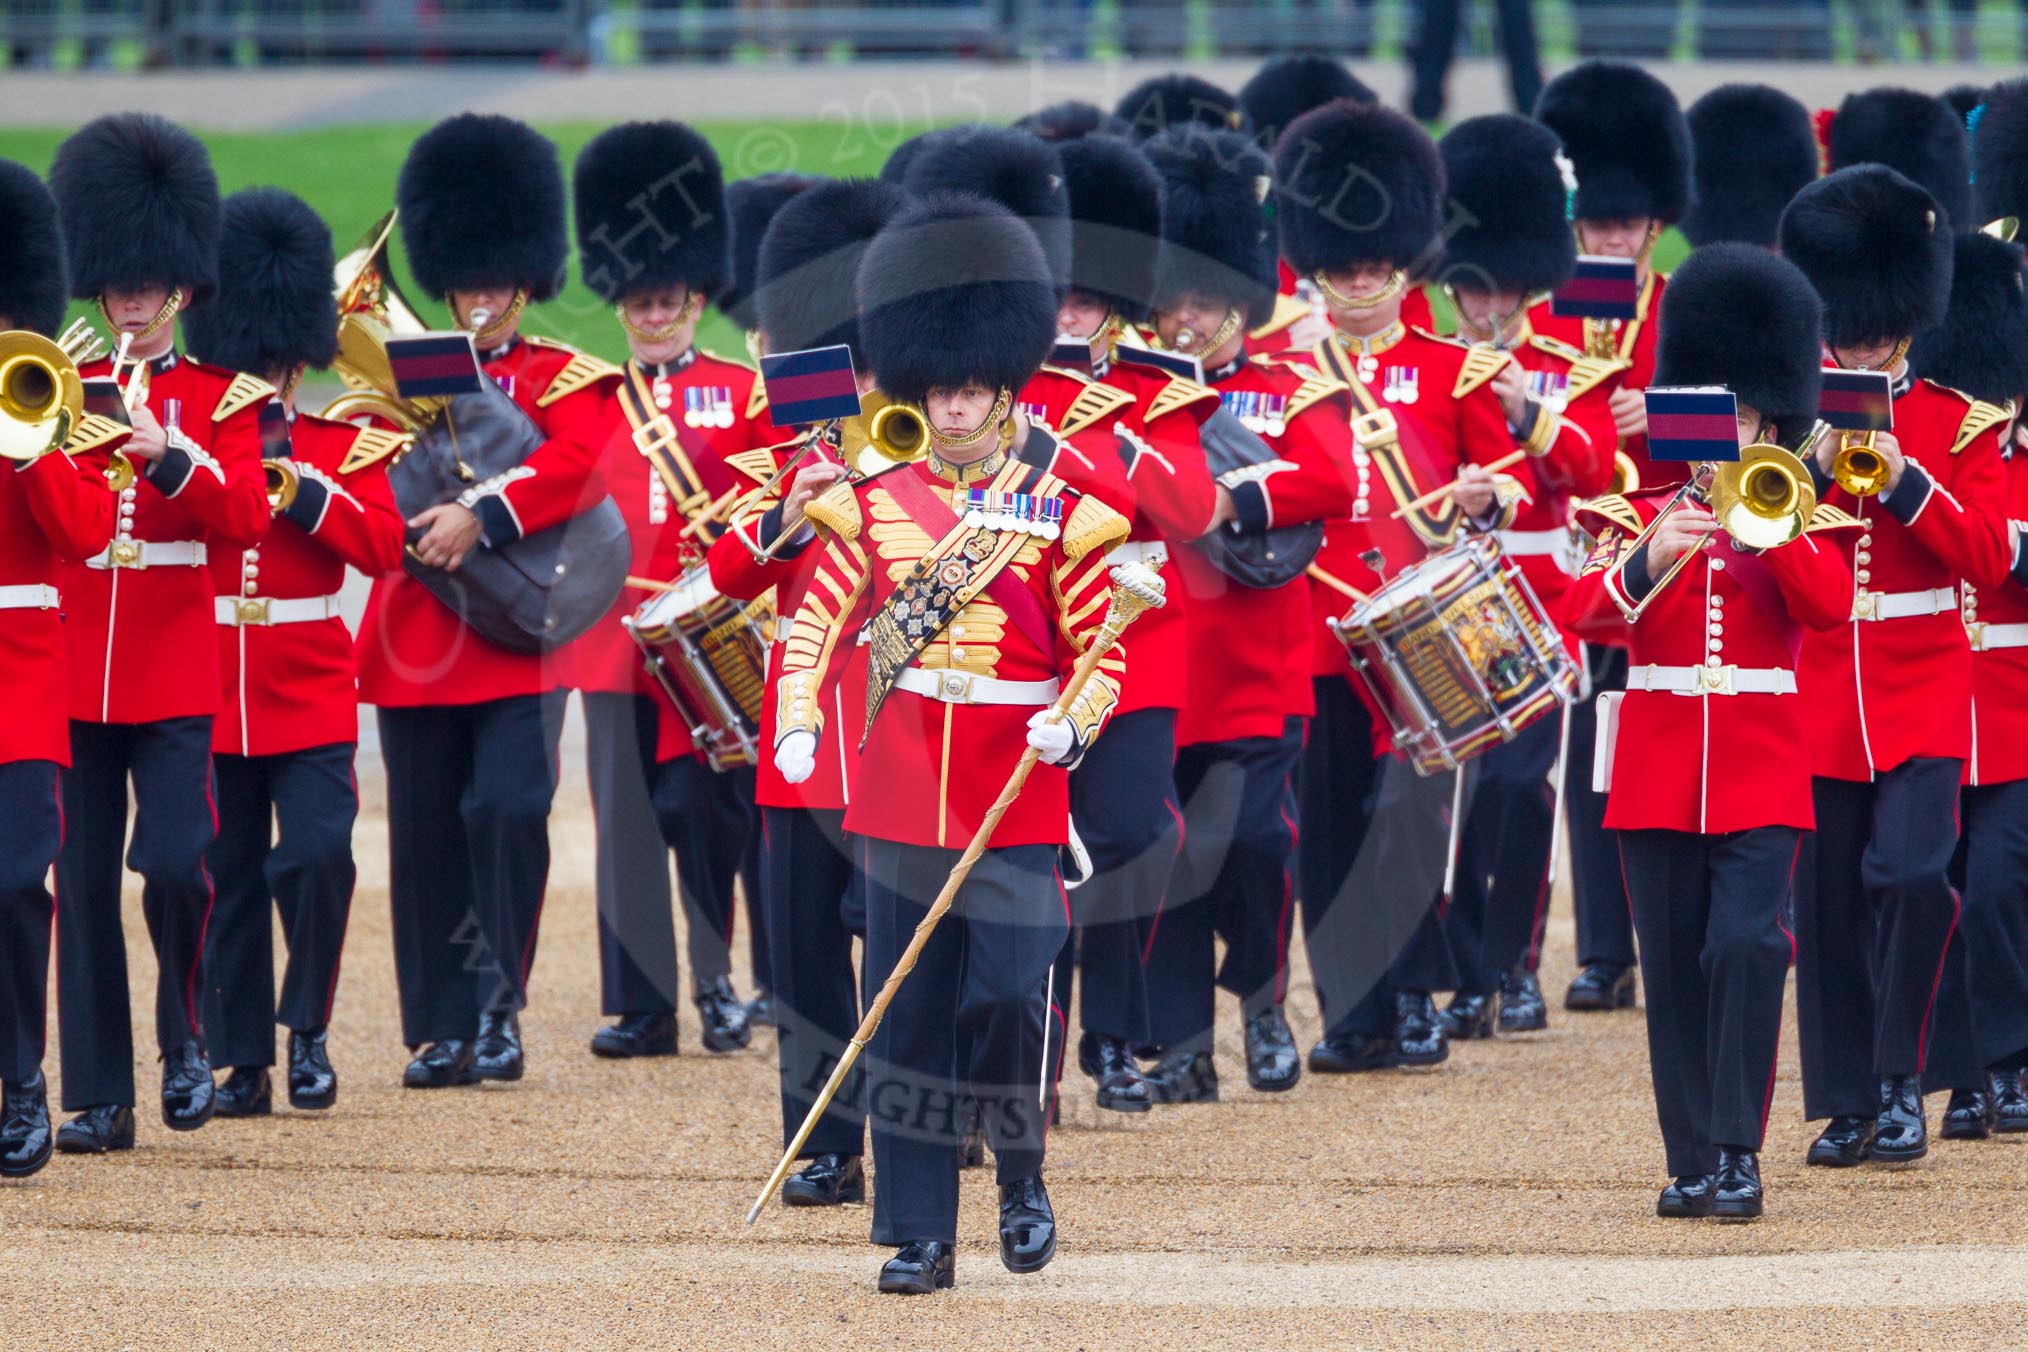 The Colonel's Review 2016.
Horse Guards Parade, Westminster,
London,

United Kingdom,
on 04 June 2016 at 10:14, image #37